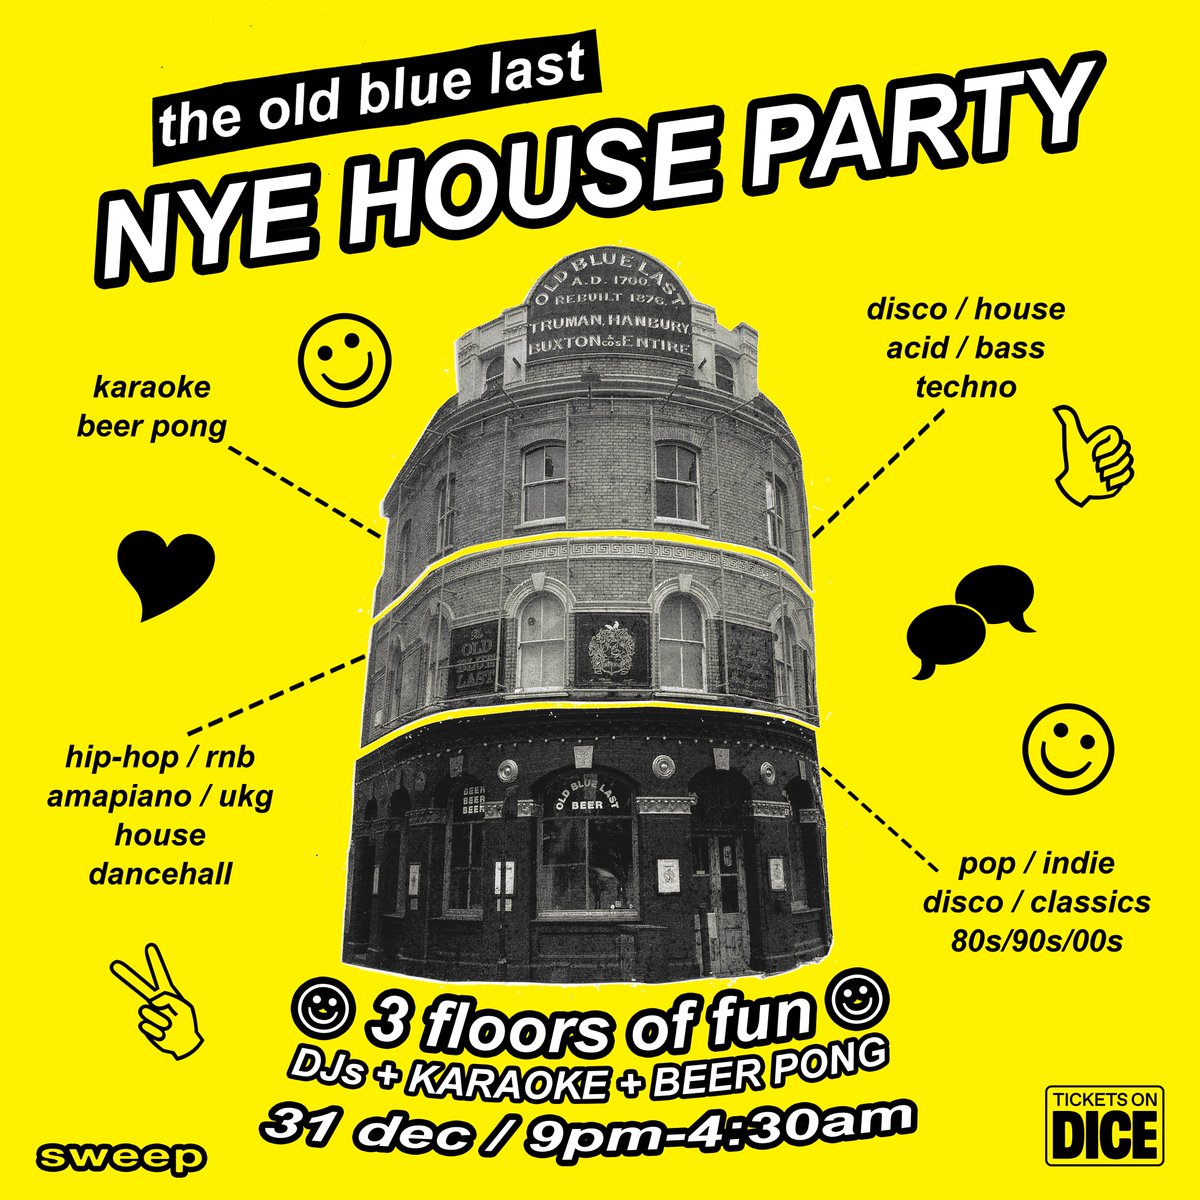 New Year's Eve Plans? 🤩 Over three floors we’ve got DJs, karaoke, beer pong, bevs, balloons… what more could you want? Tickets: link.dice.fm/Lb8EbIxaSFb